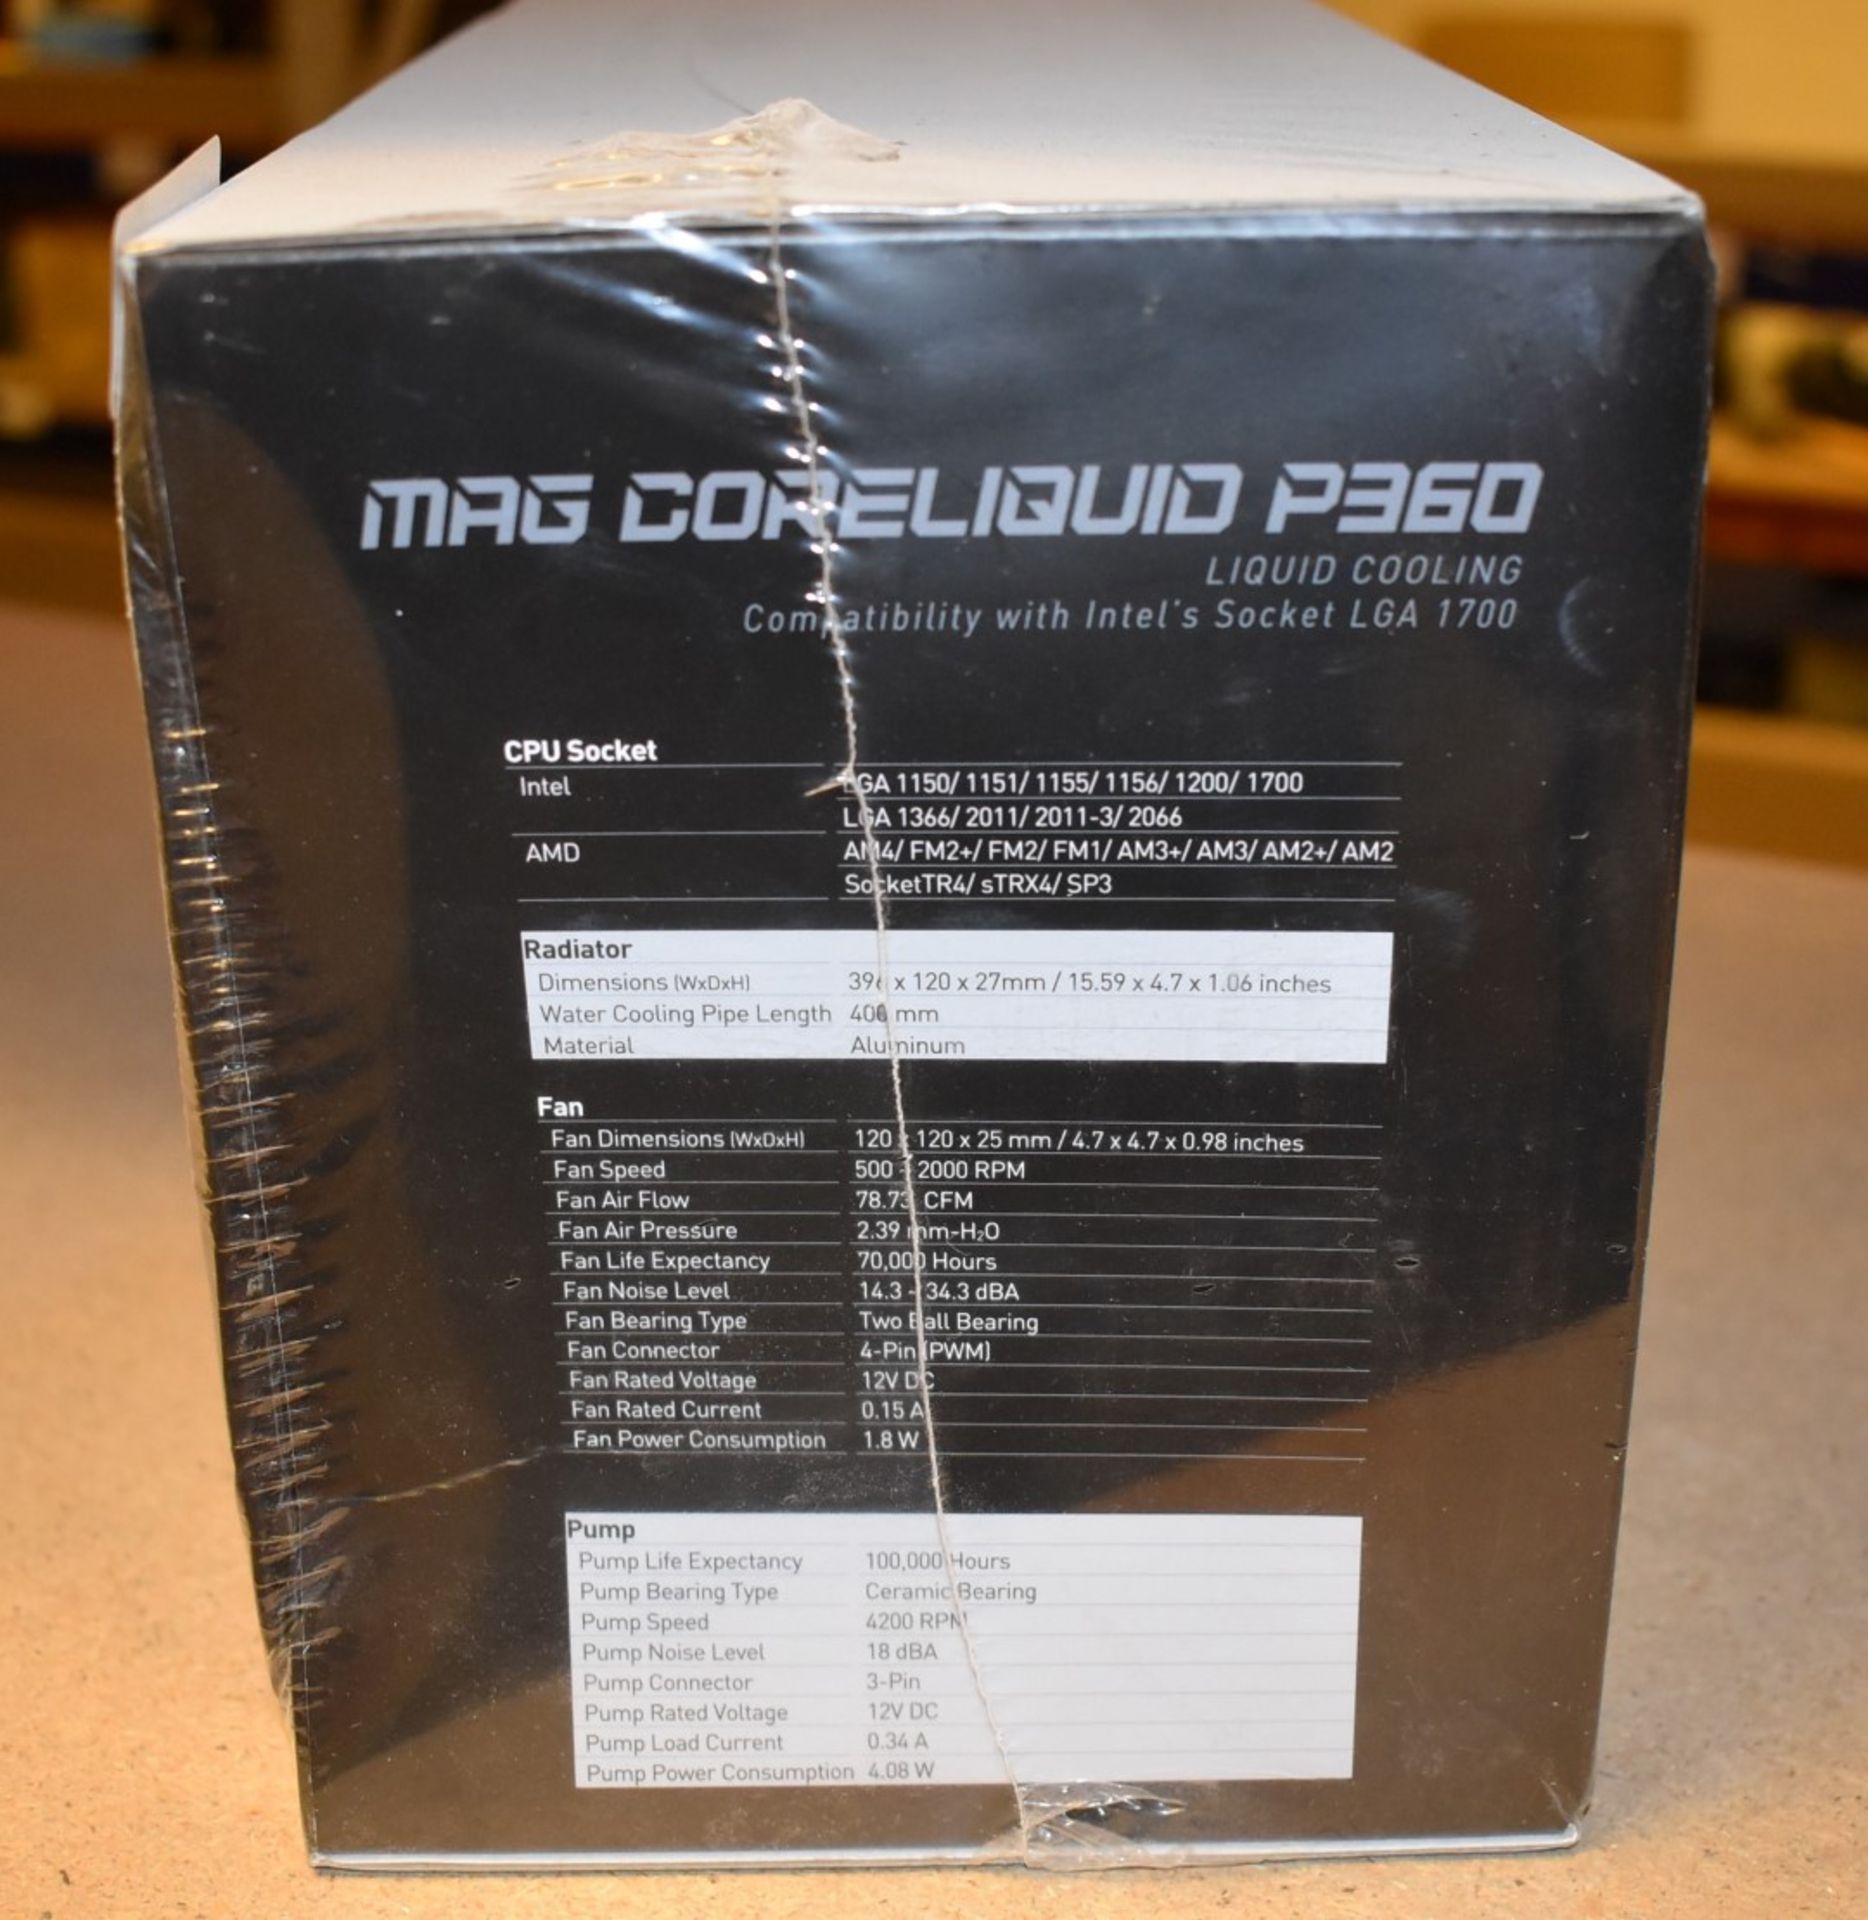 1 x MSI Mag Coreliquid P360 Liquid Cooling System - Triple RGB Fans - For Intel and AMD Processors - - Image 2 of 7